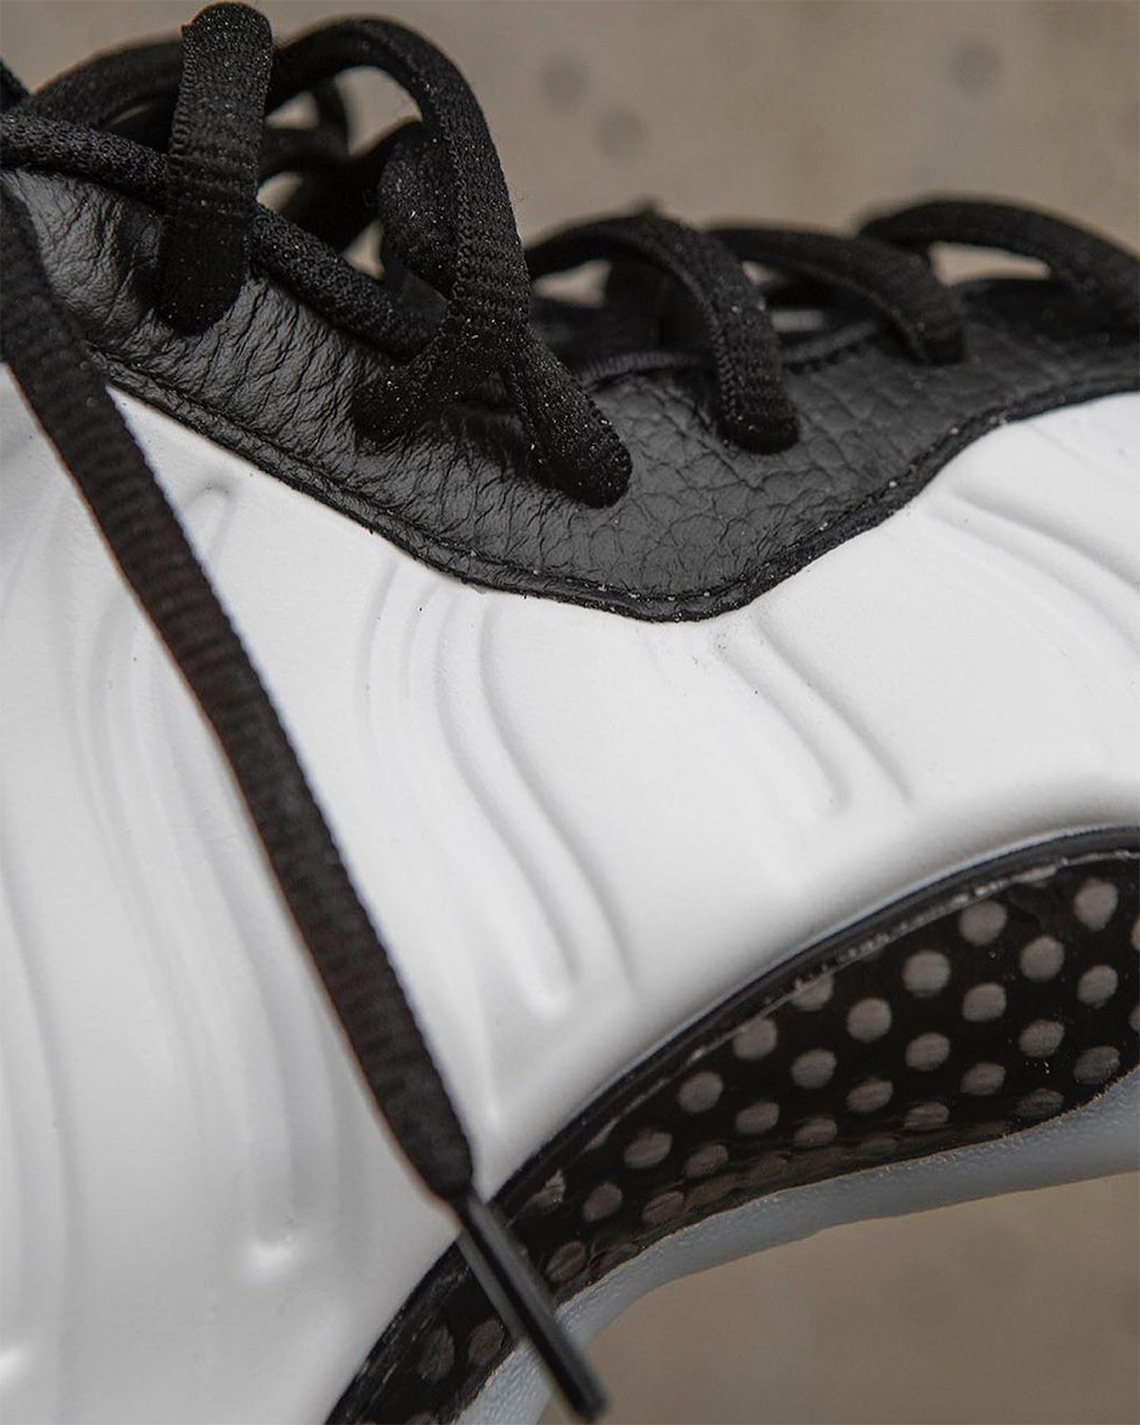 Penny Hardaway's White Foamposite PEs Are Finally Being Released